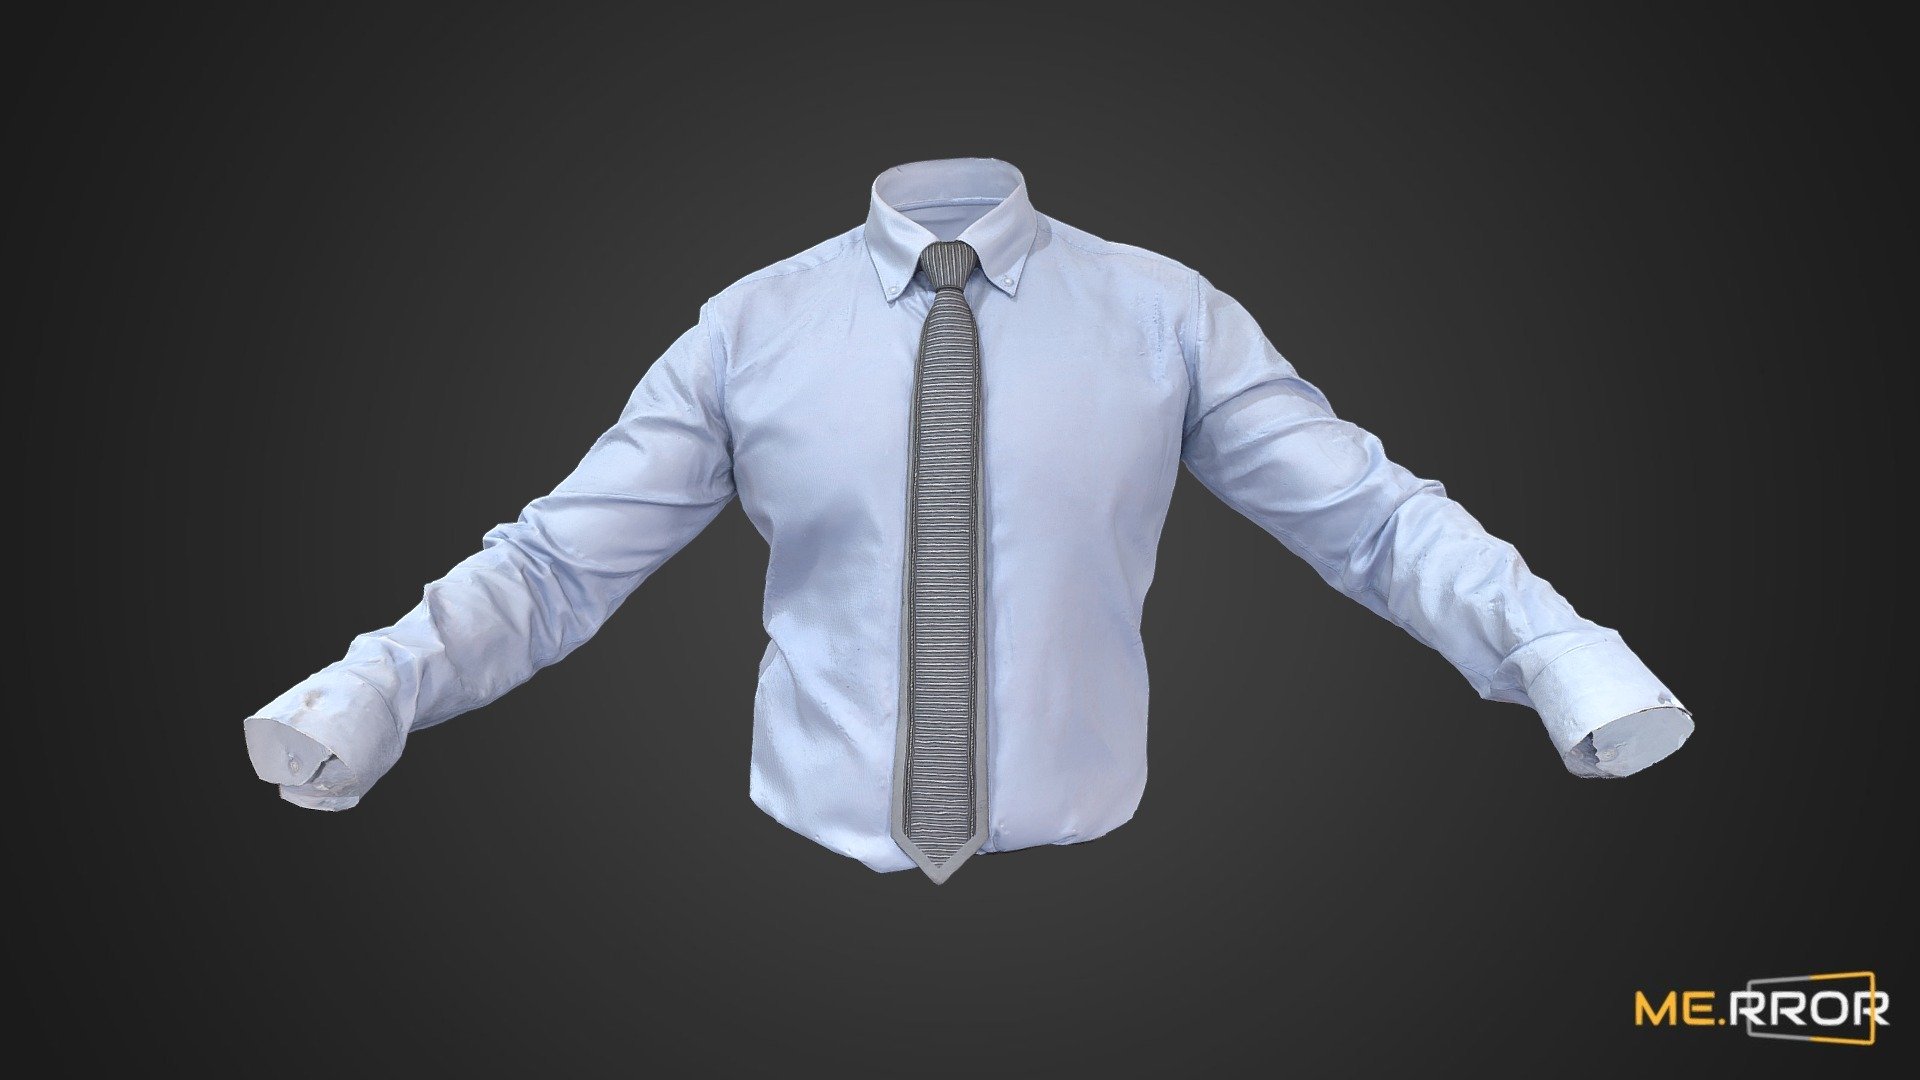 MERROR is a 3D Content PLATFORM which introduces various Asian assets to the 3D world


3DScanning #Photogrametry #ME.RROR - SkyBlue Shirt Tie - Buy Royalty Free 3D model by ME.RROR Studio (@merror) 3d model